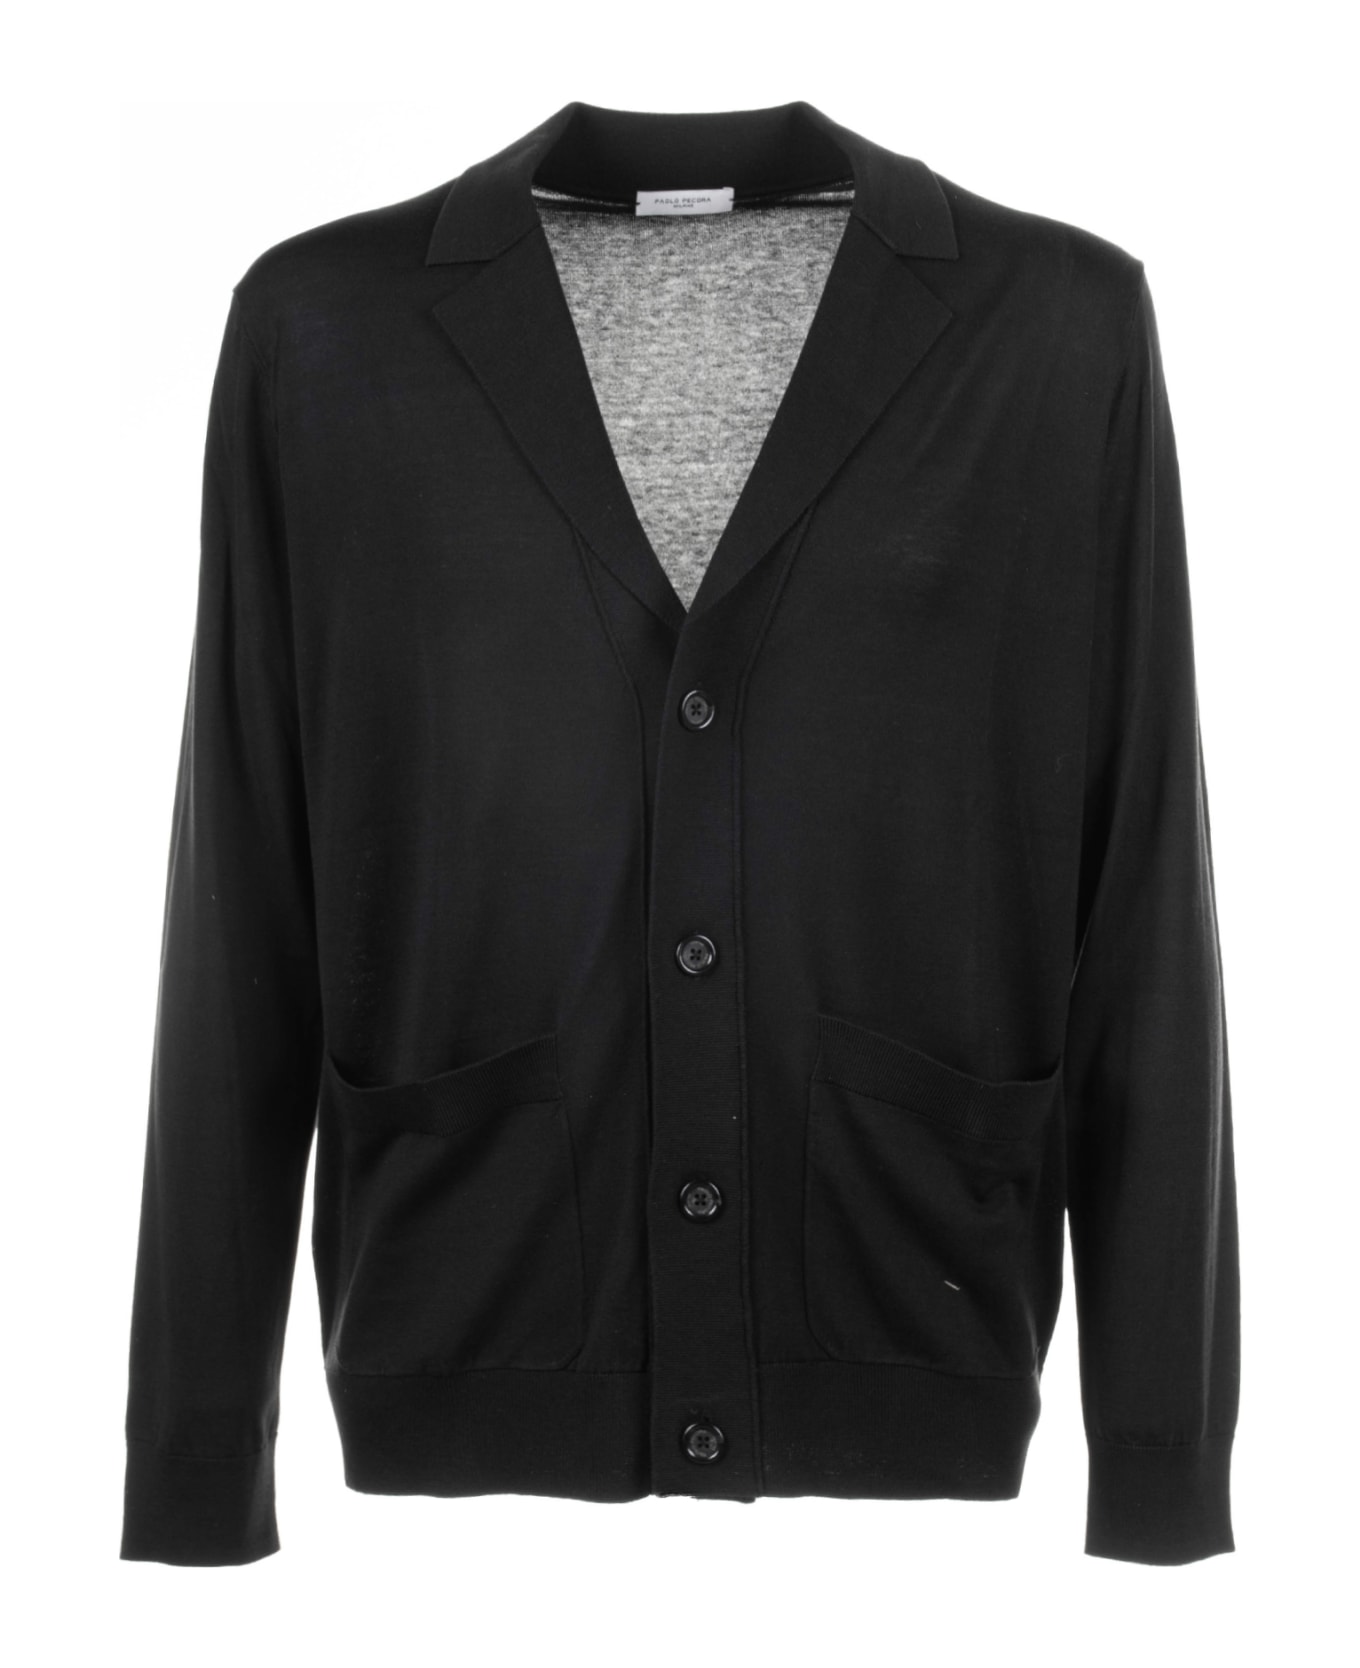 Paolo Pecora Black Cardigan With Pockets And Buttons - NERO カーディガン